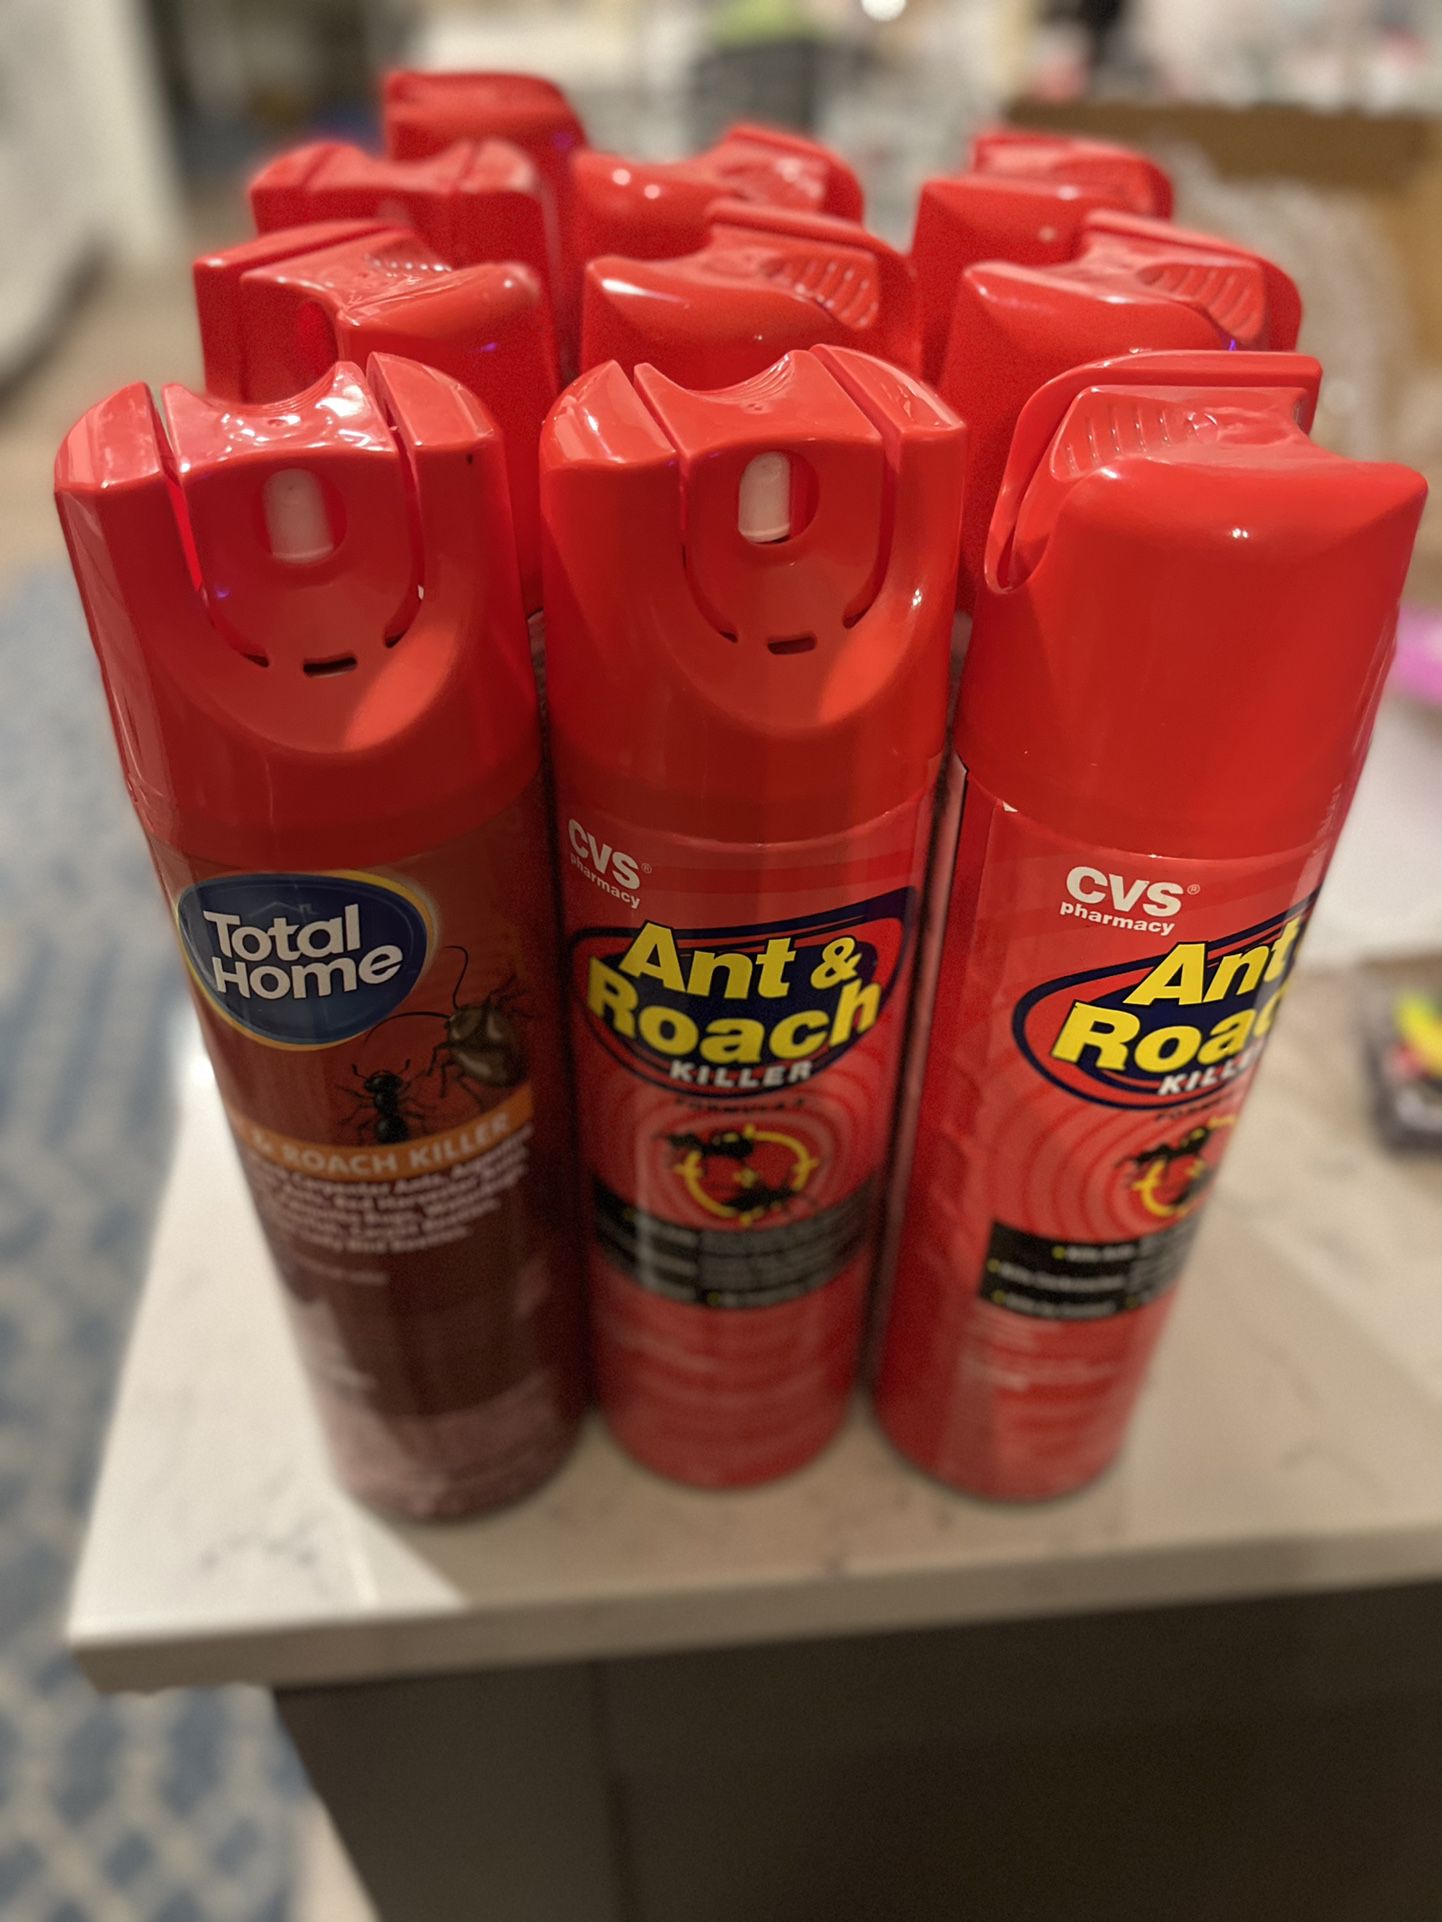 Ant And roach Spray - 10 Cans